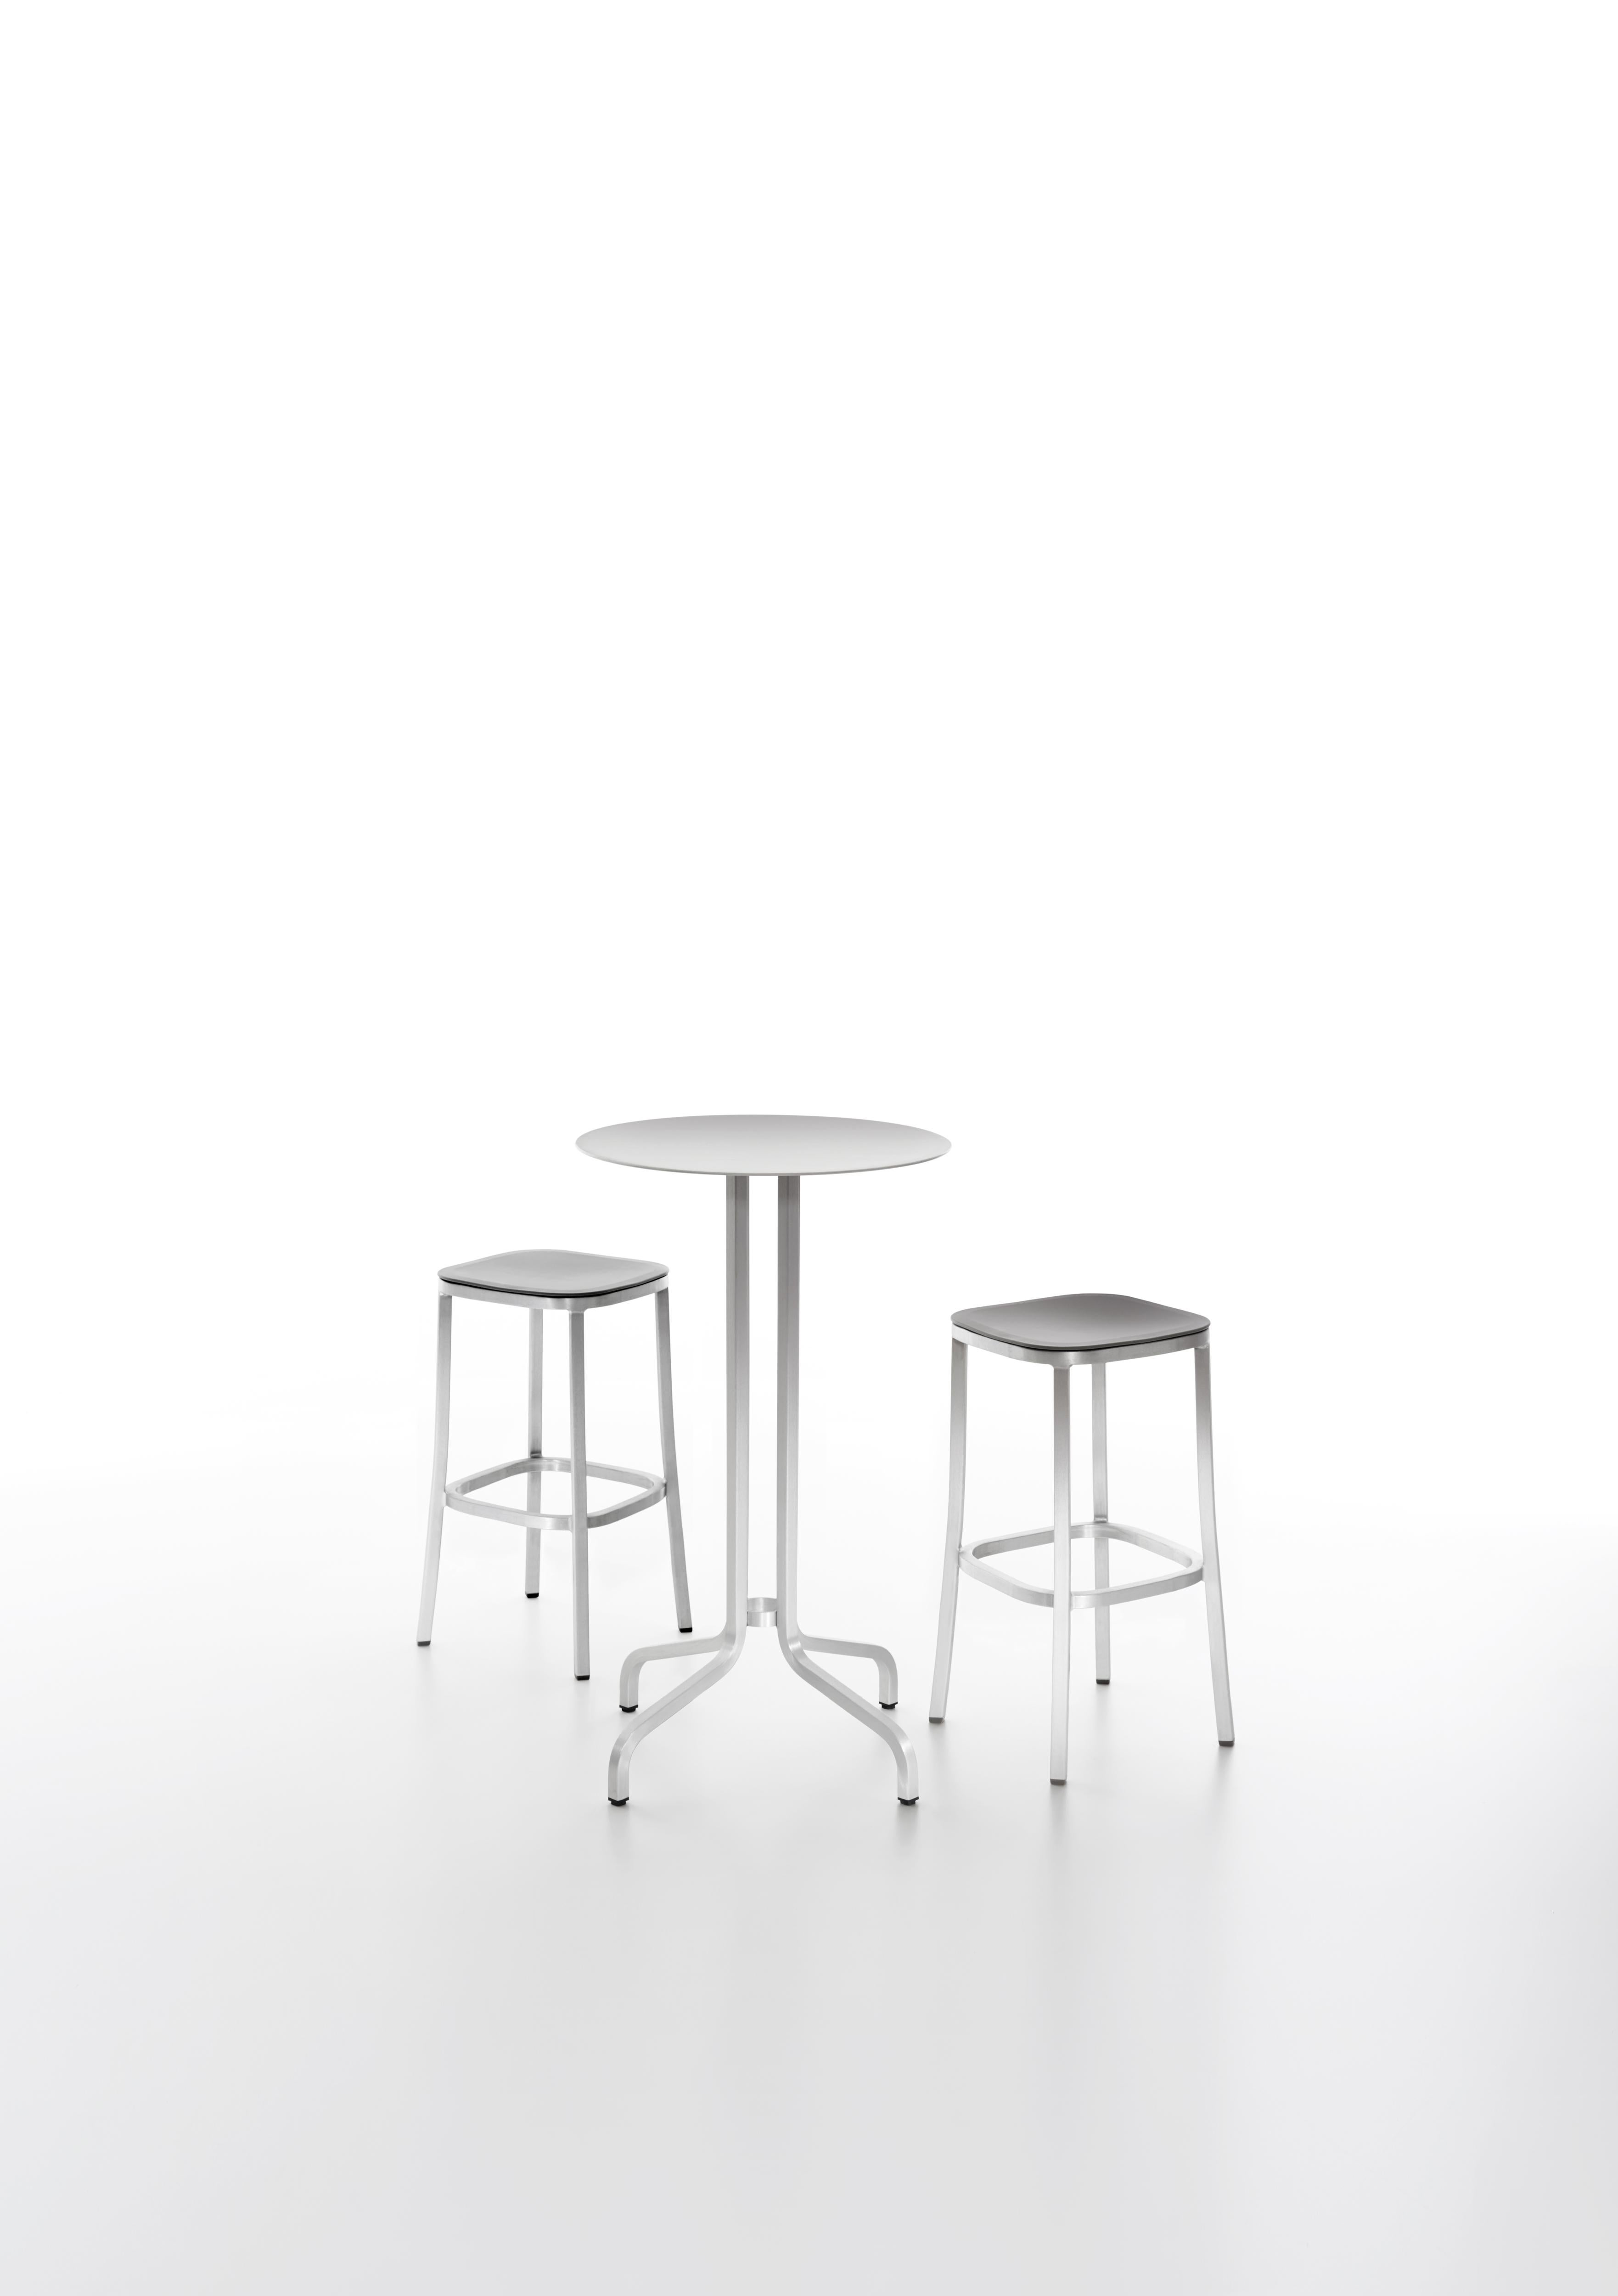 Emeco Small Stool in Brushed Aluminum & Ash by Jasper Morrison In New Condition For Sale In Hanover, PA